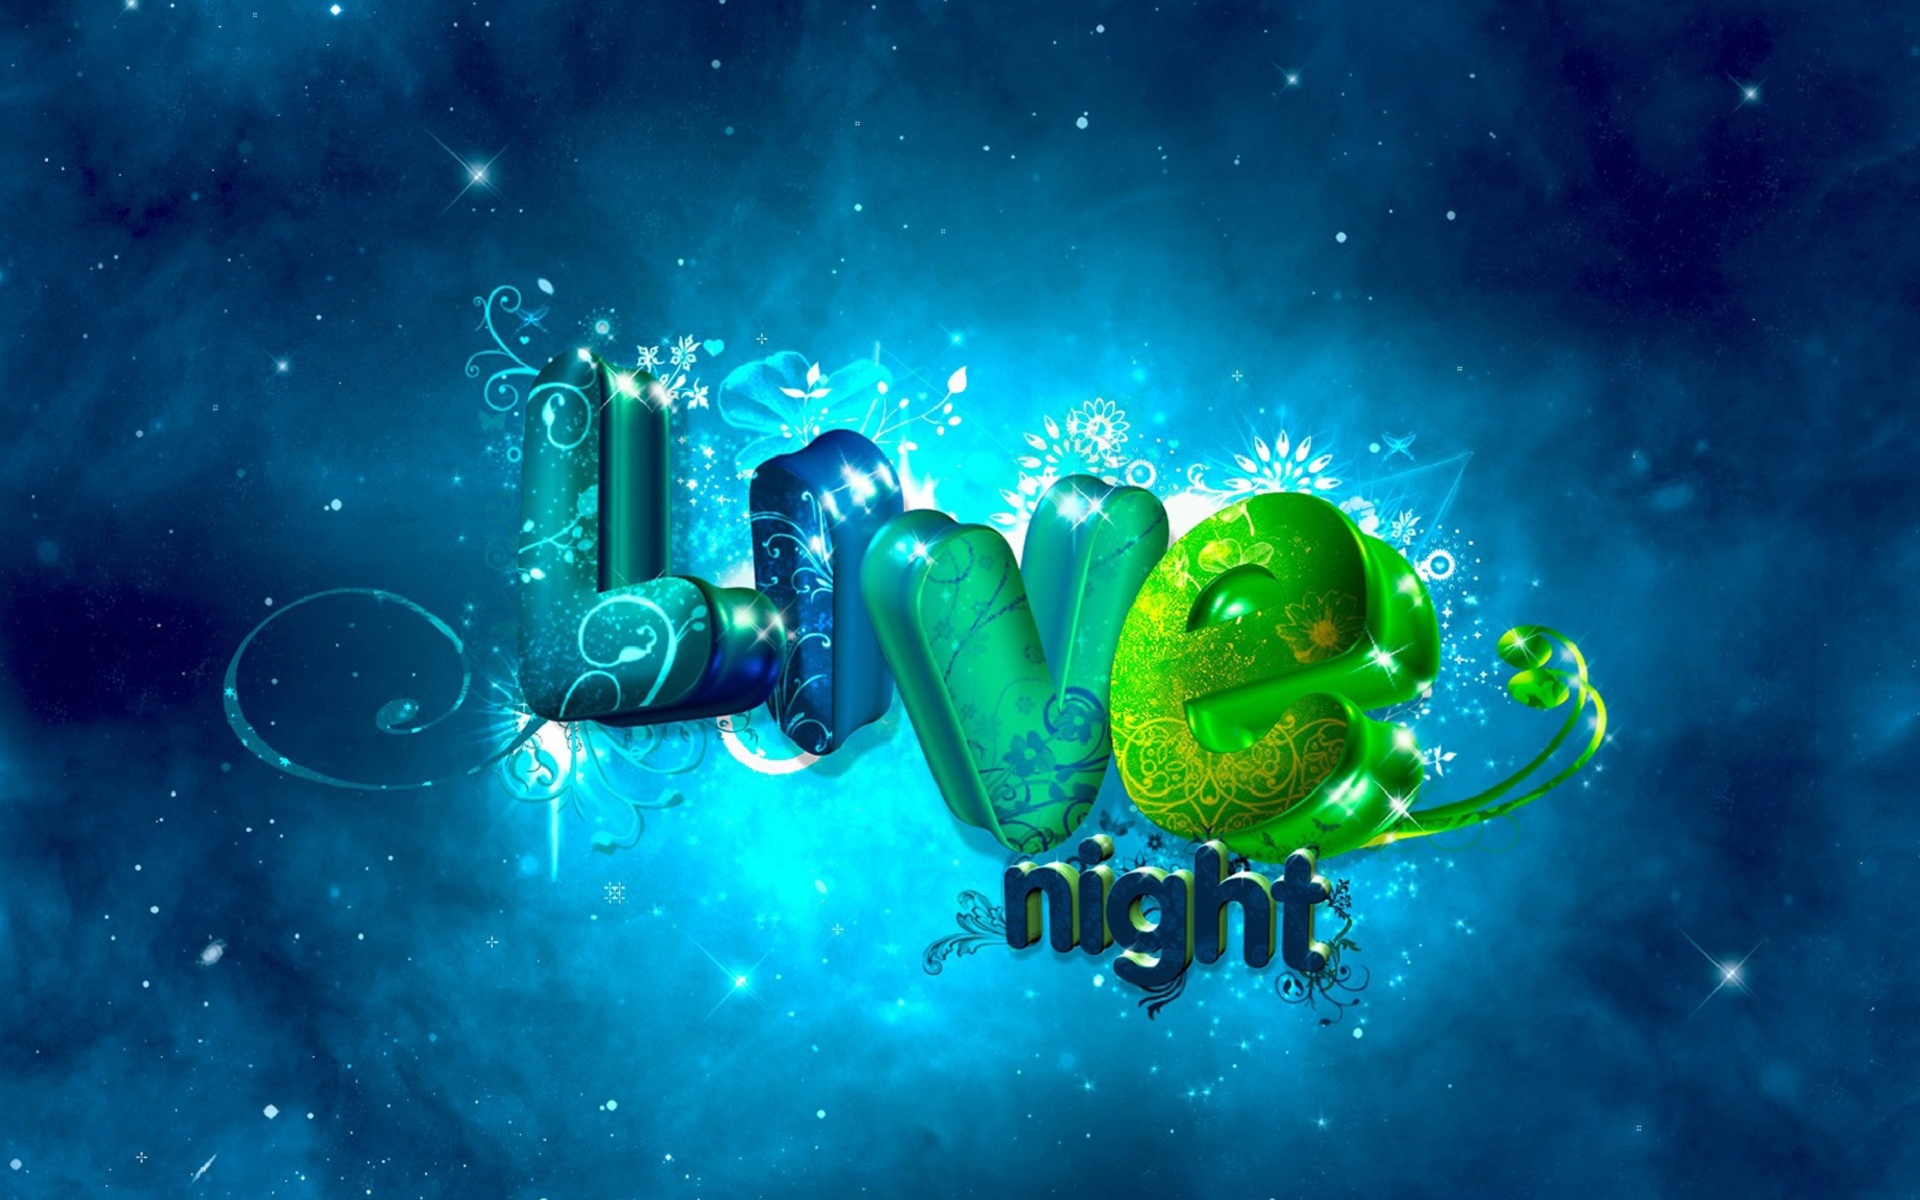 Live Night Wallpapers HD Wallpapers 1920x1200